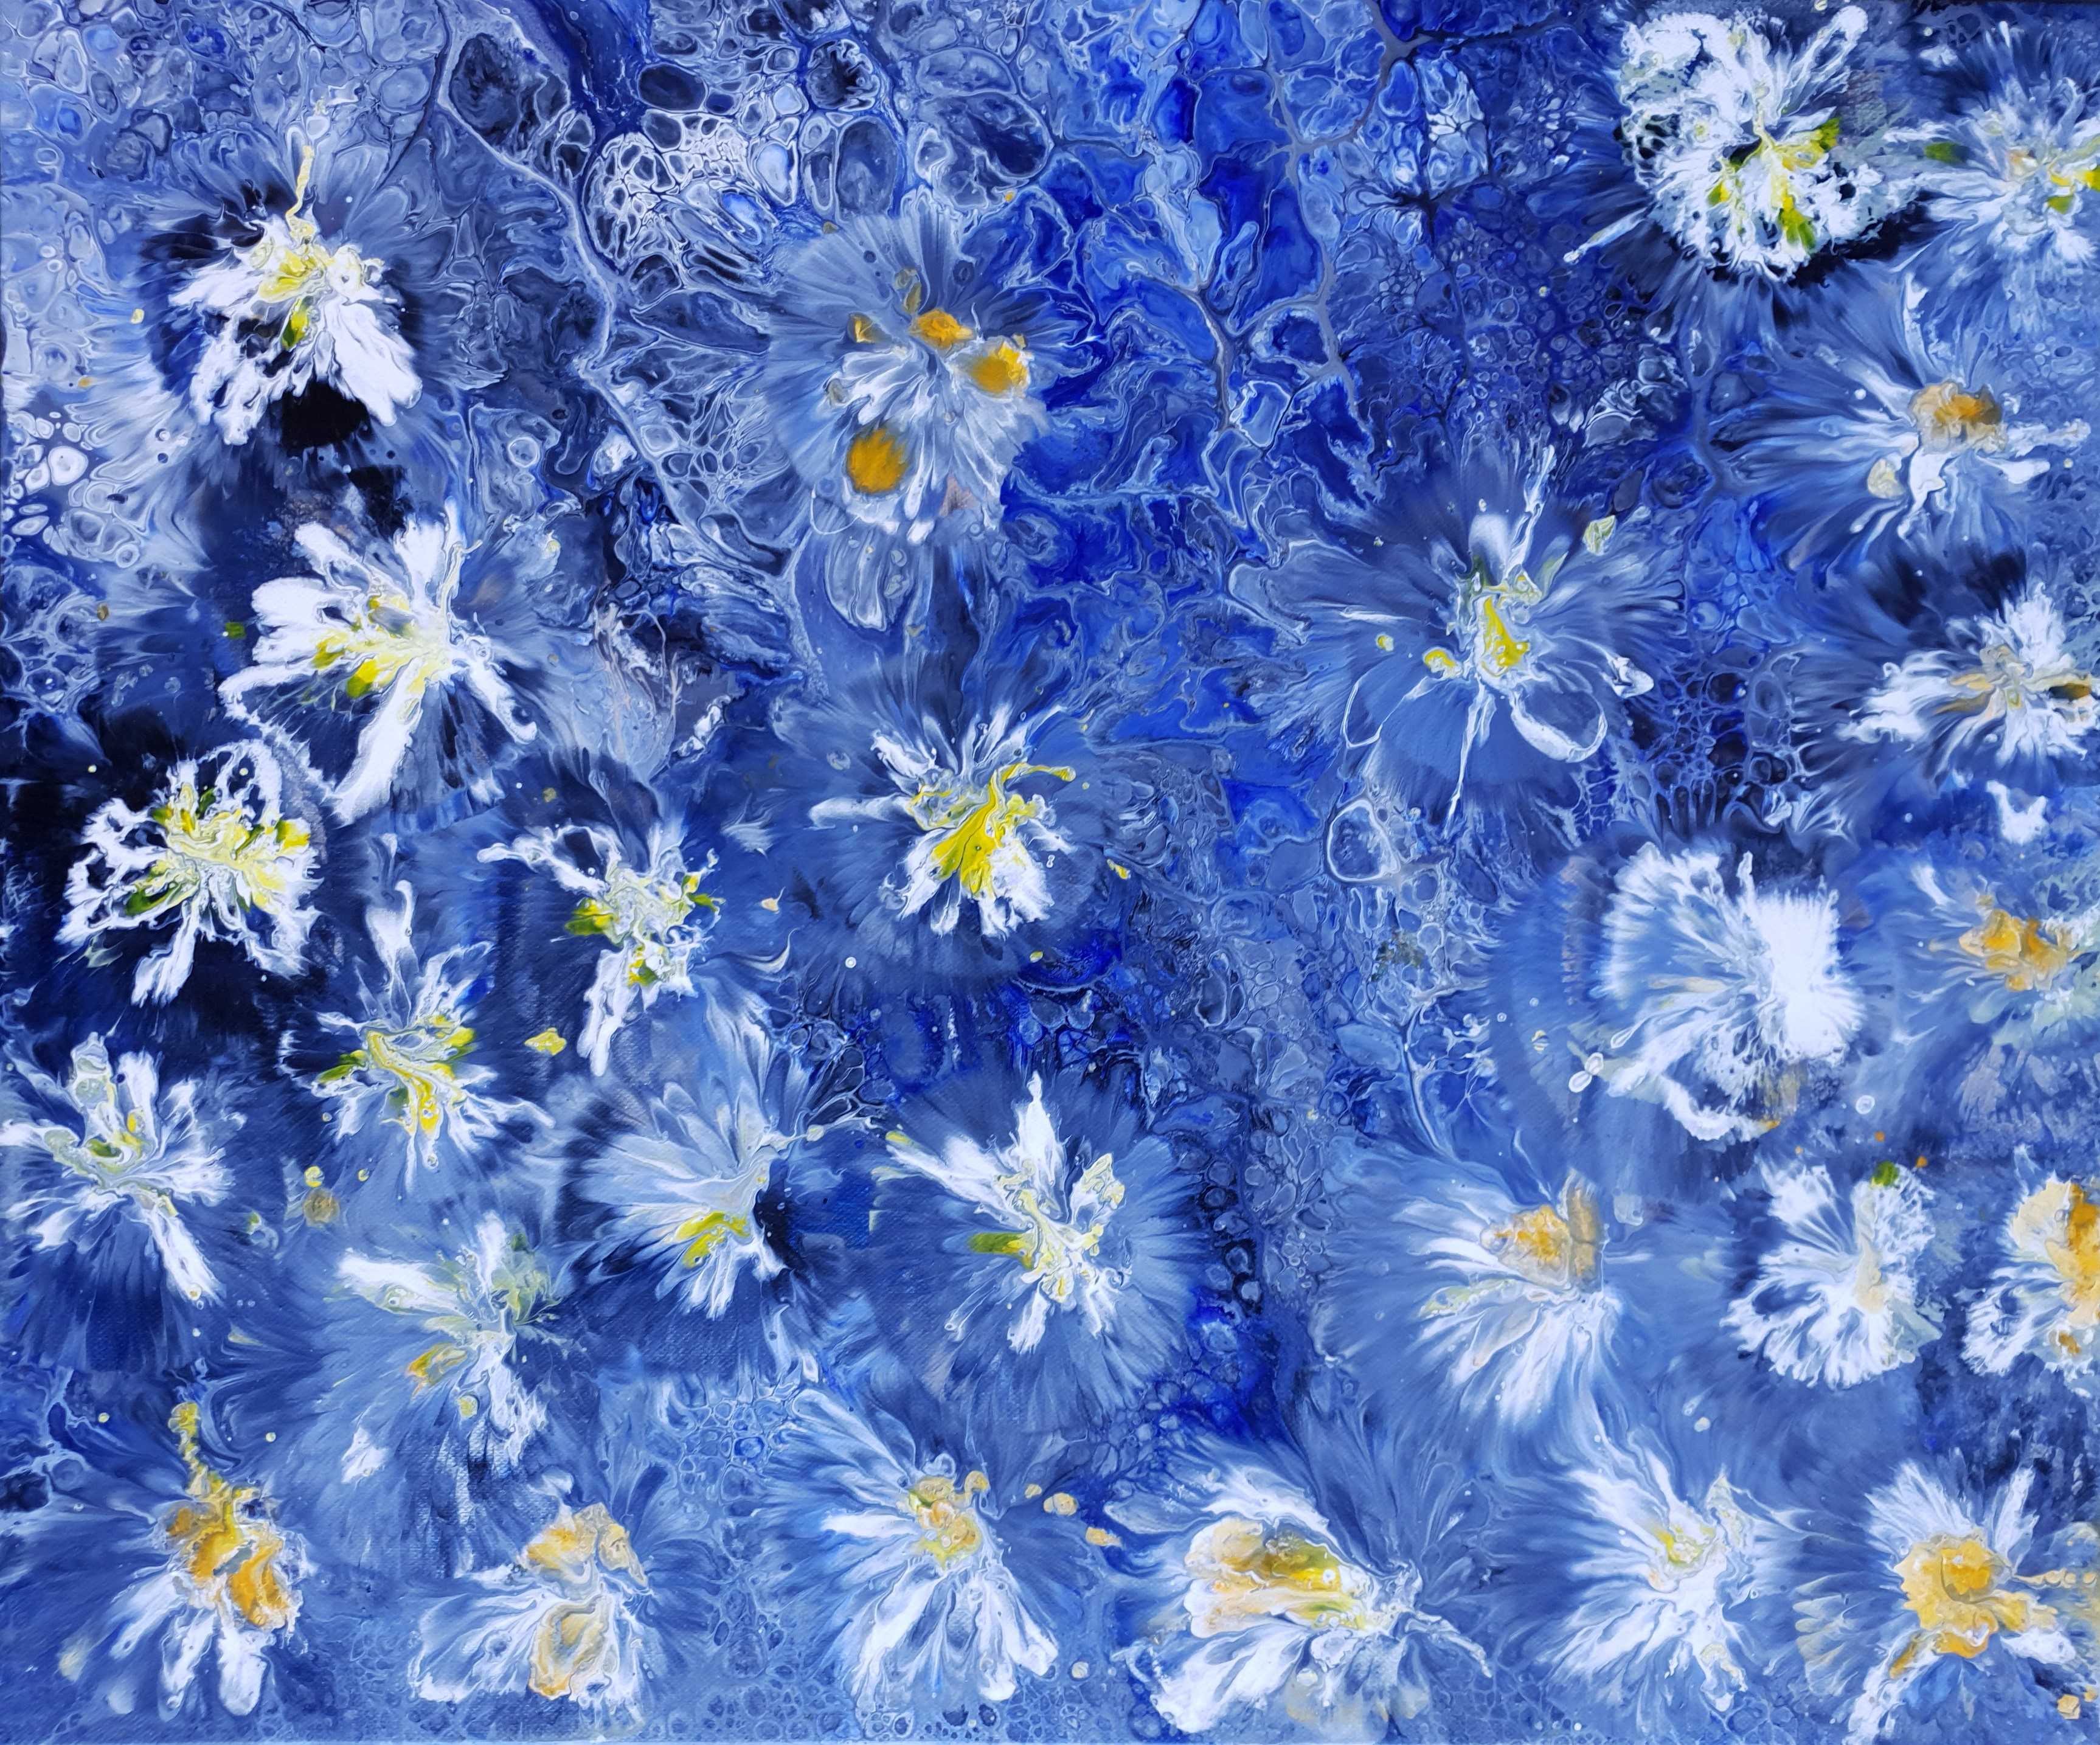 Abstract art representation of daisies in bloom